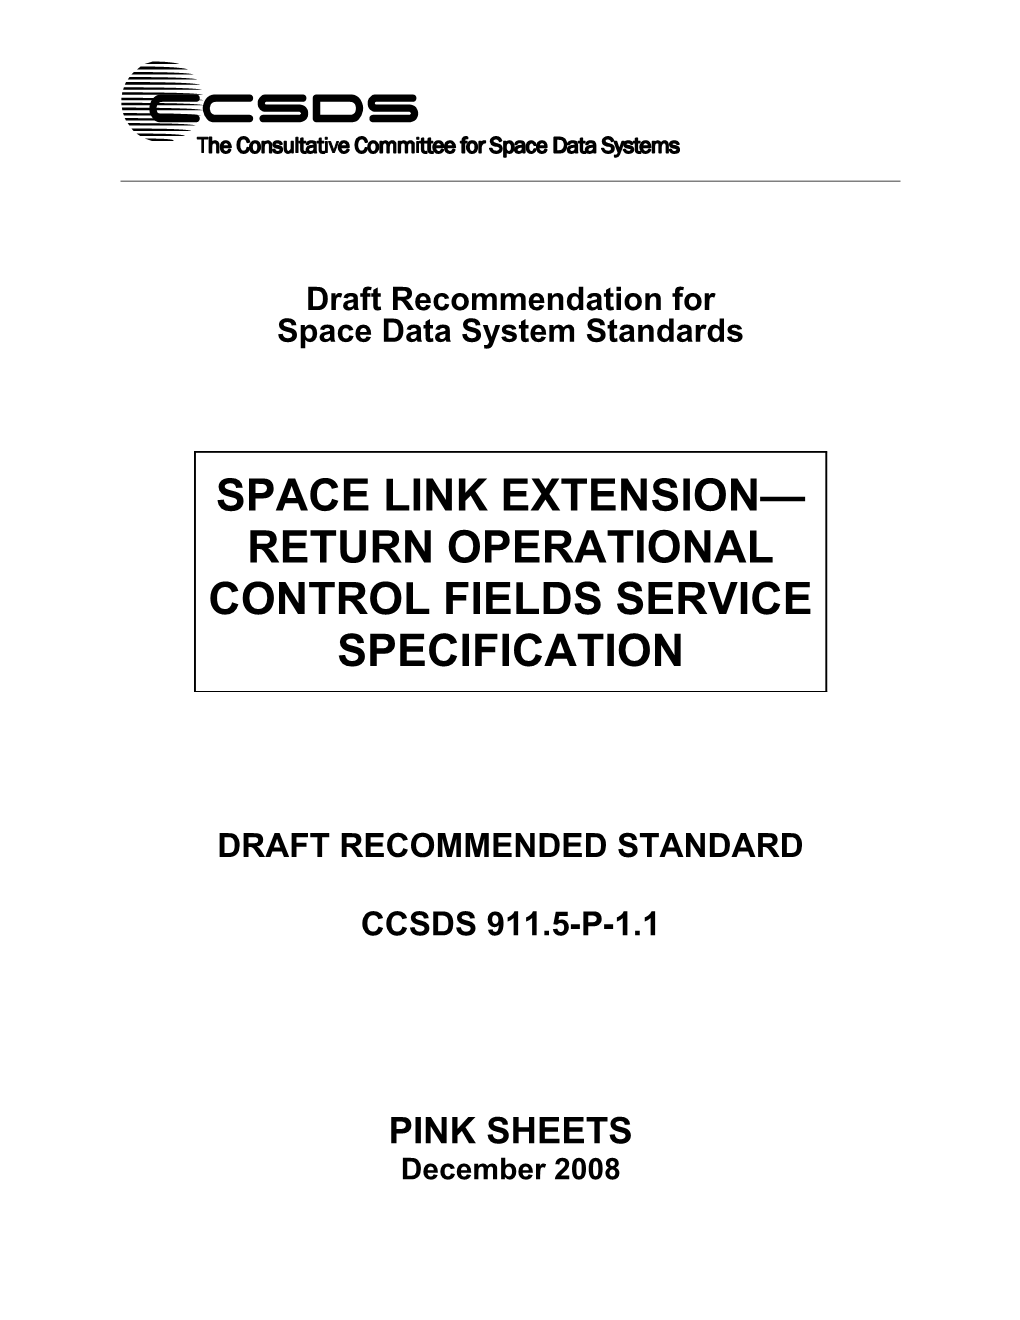 Space Link Extension Return Operational Control Fields Service Specification